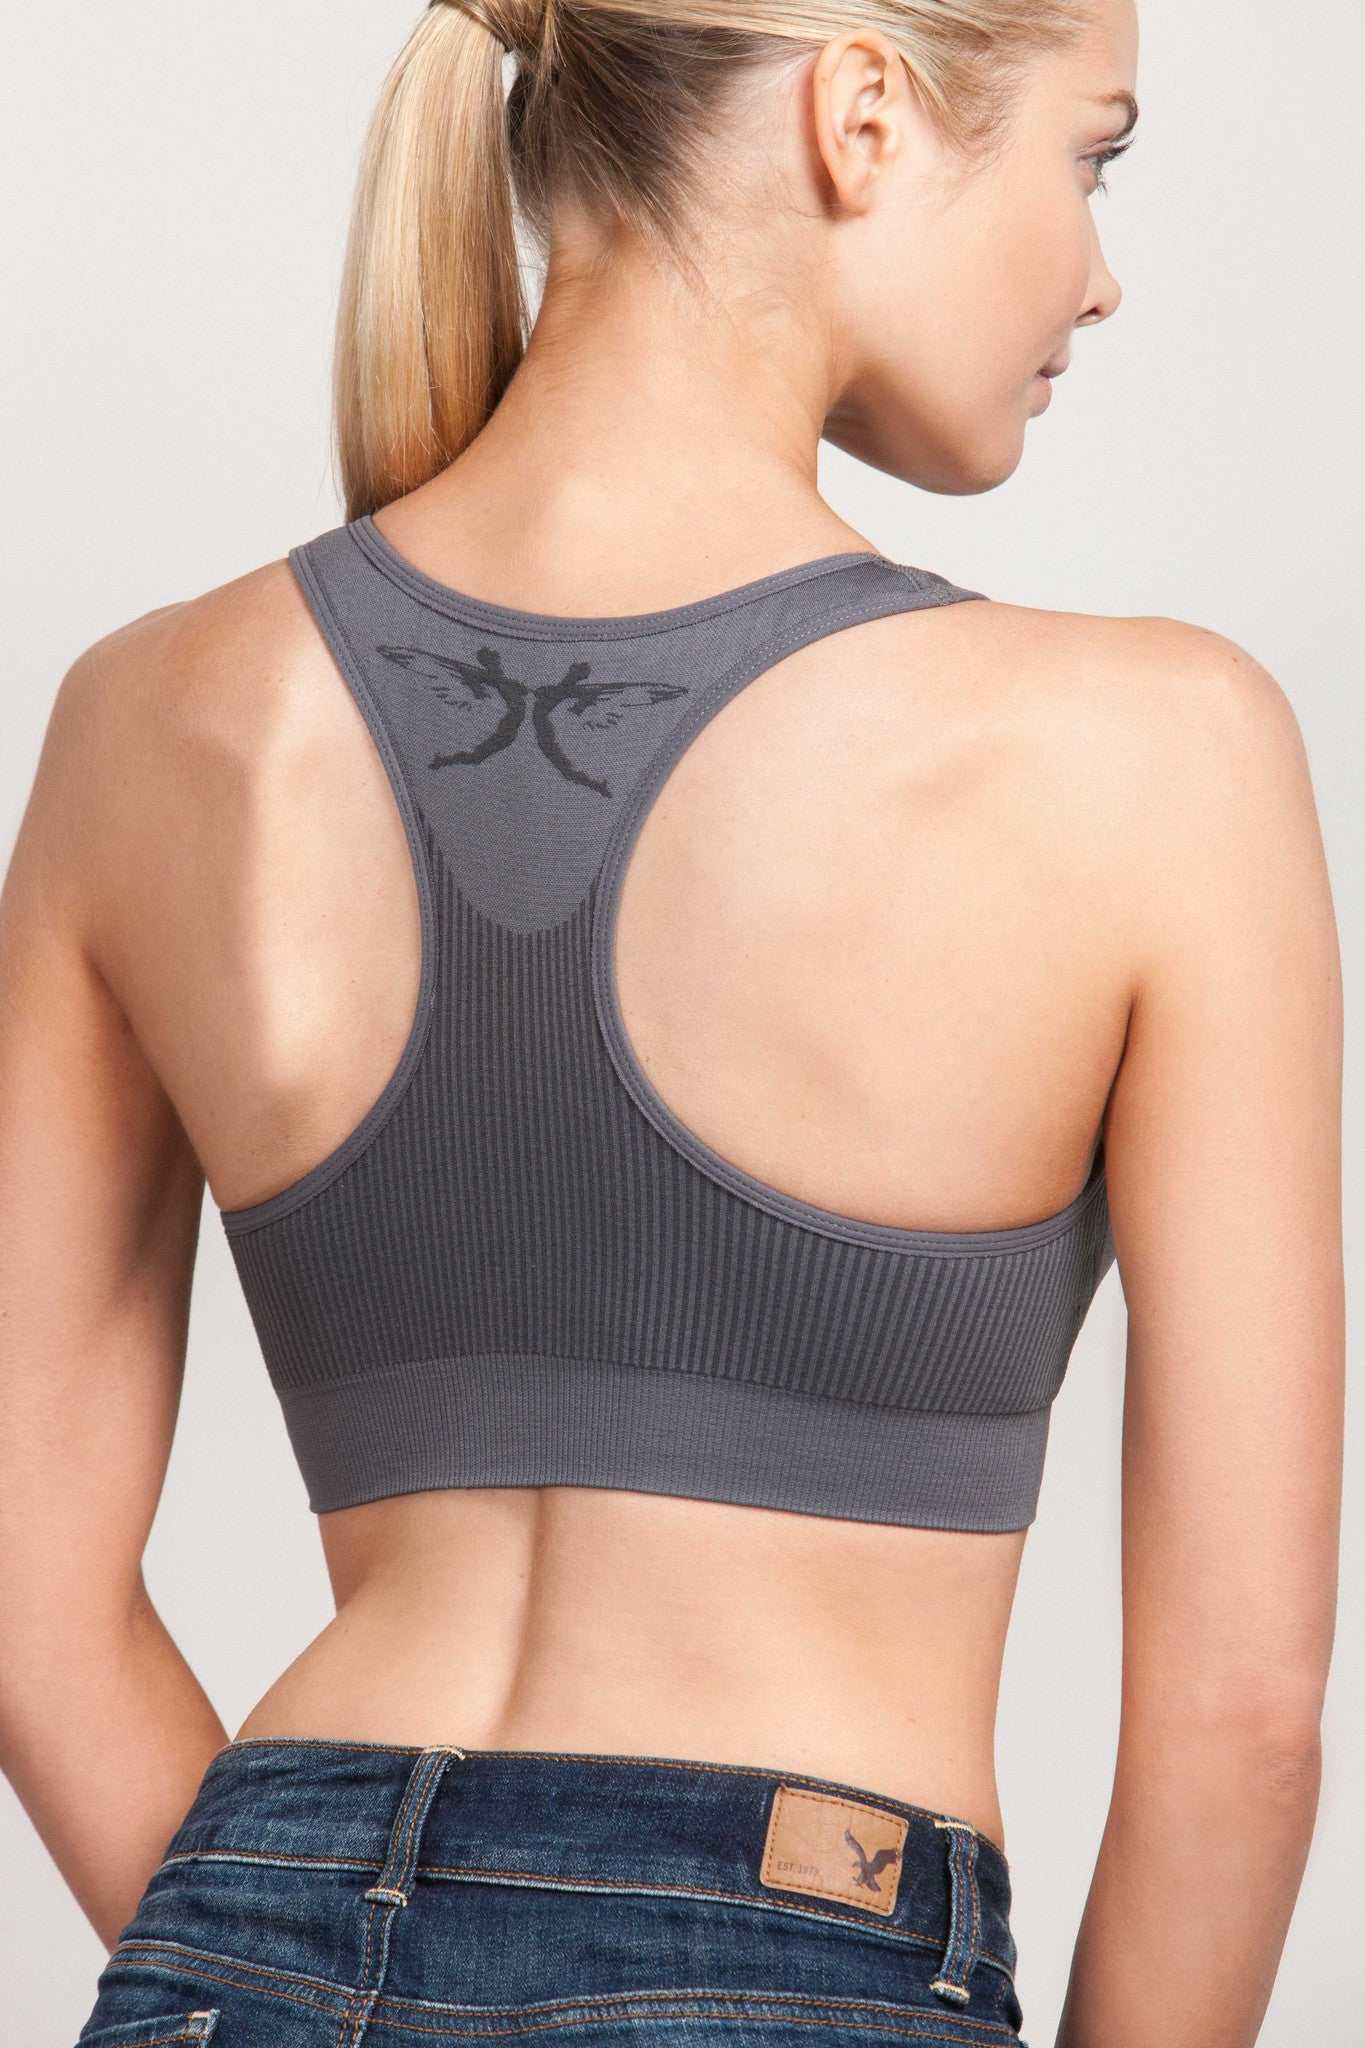 Breast Whisperer Bra for Augmented Women in Charcoal Back